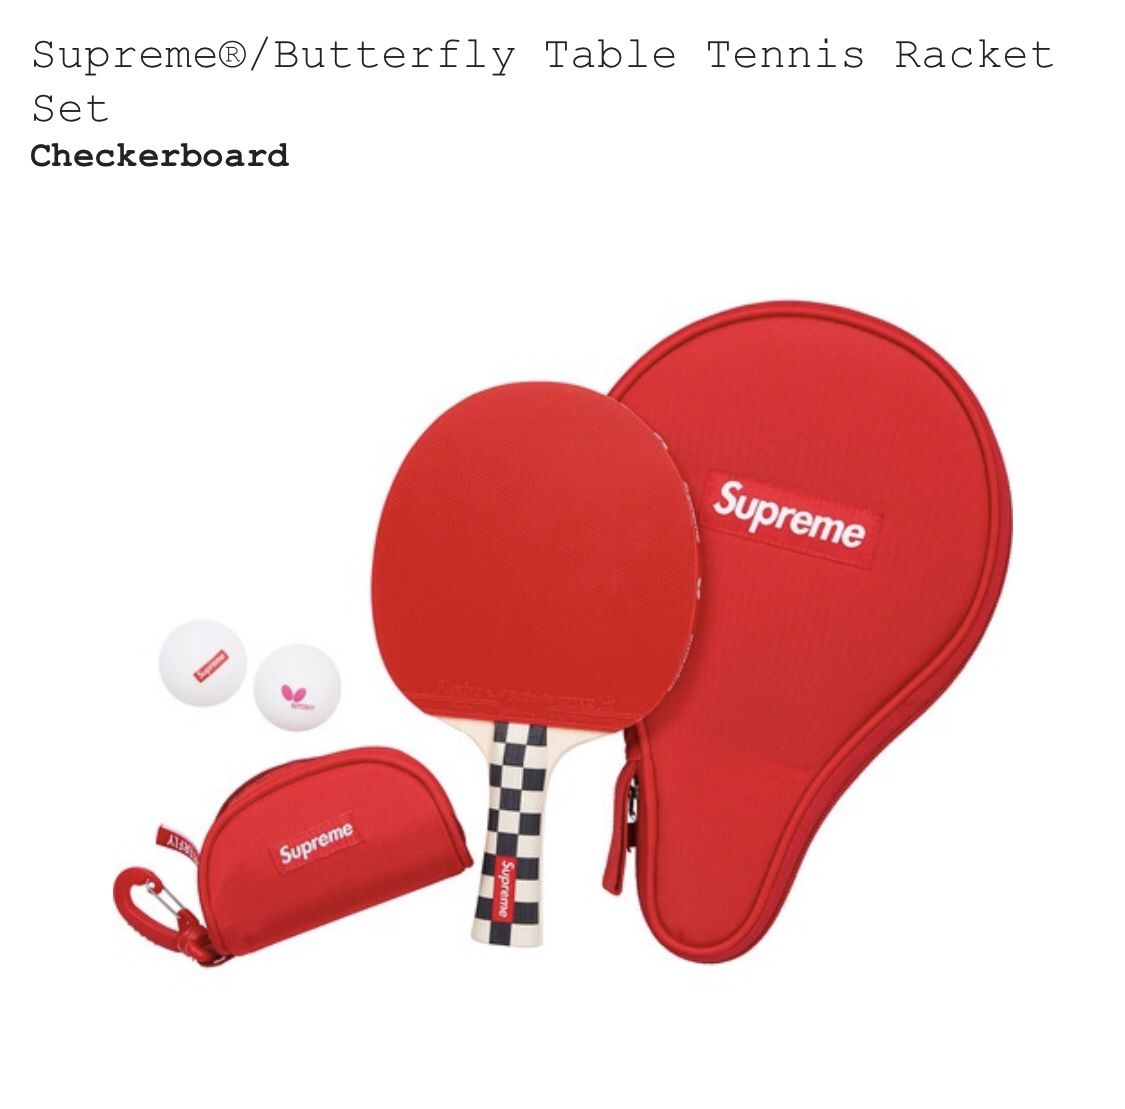 Supreme®/Butterfly Table Tennis Racket Set Style: Checkerboard